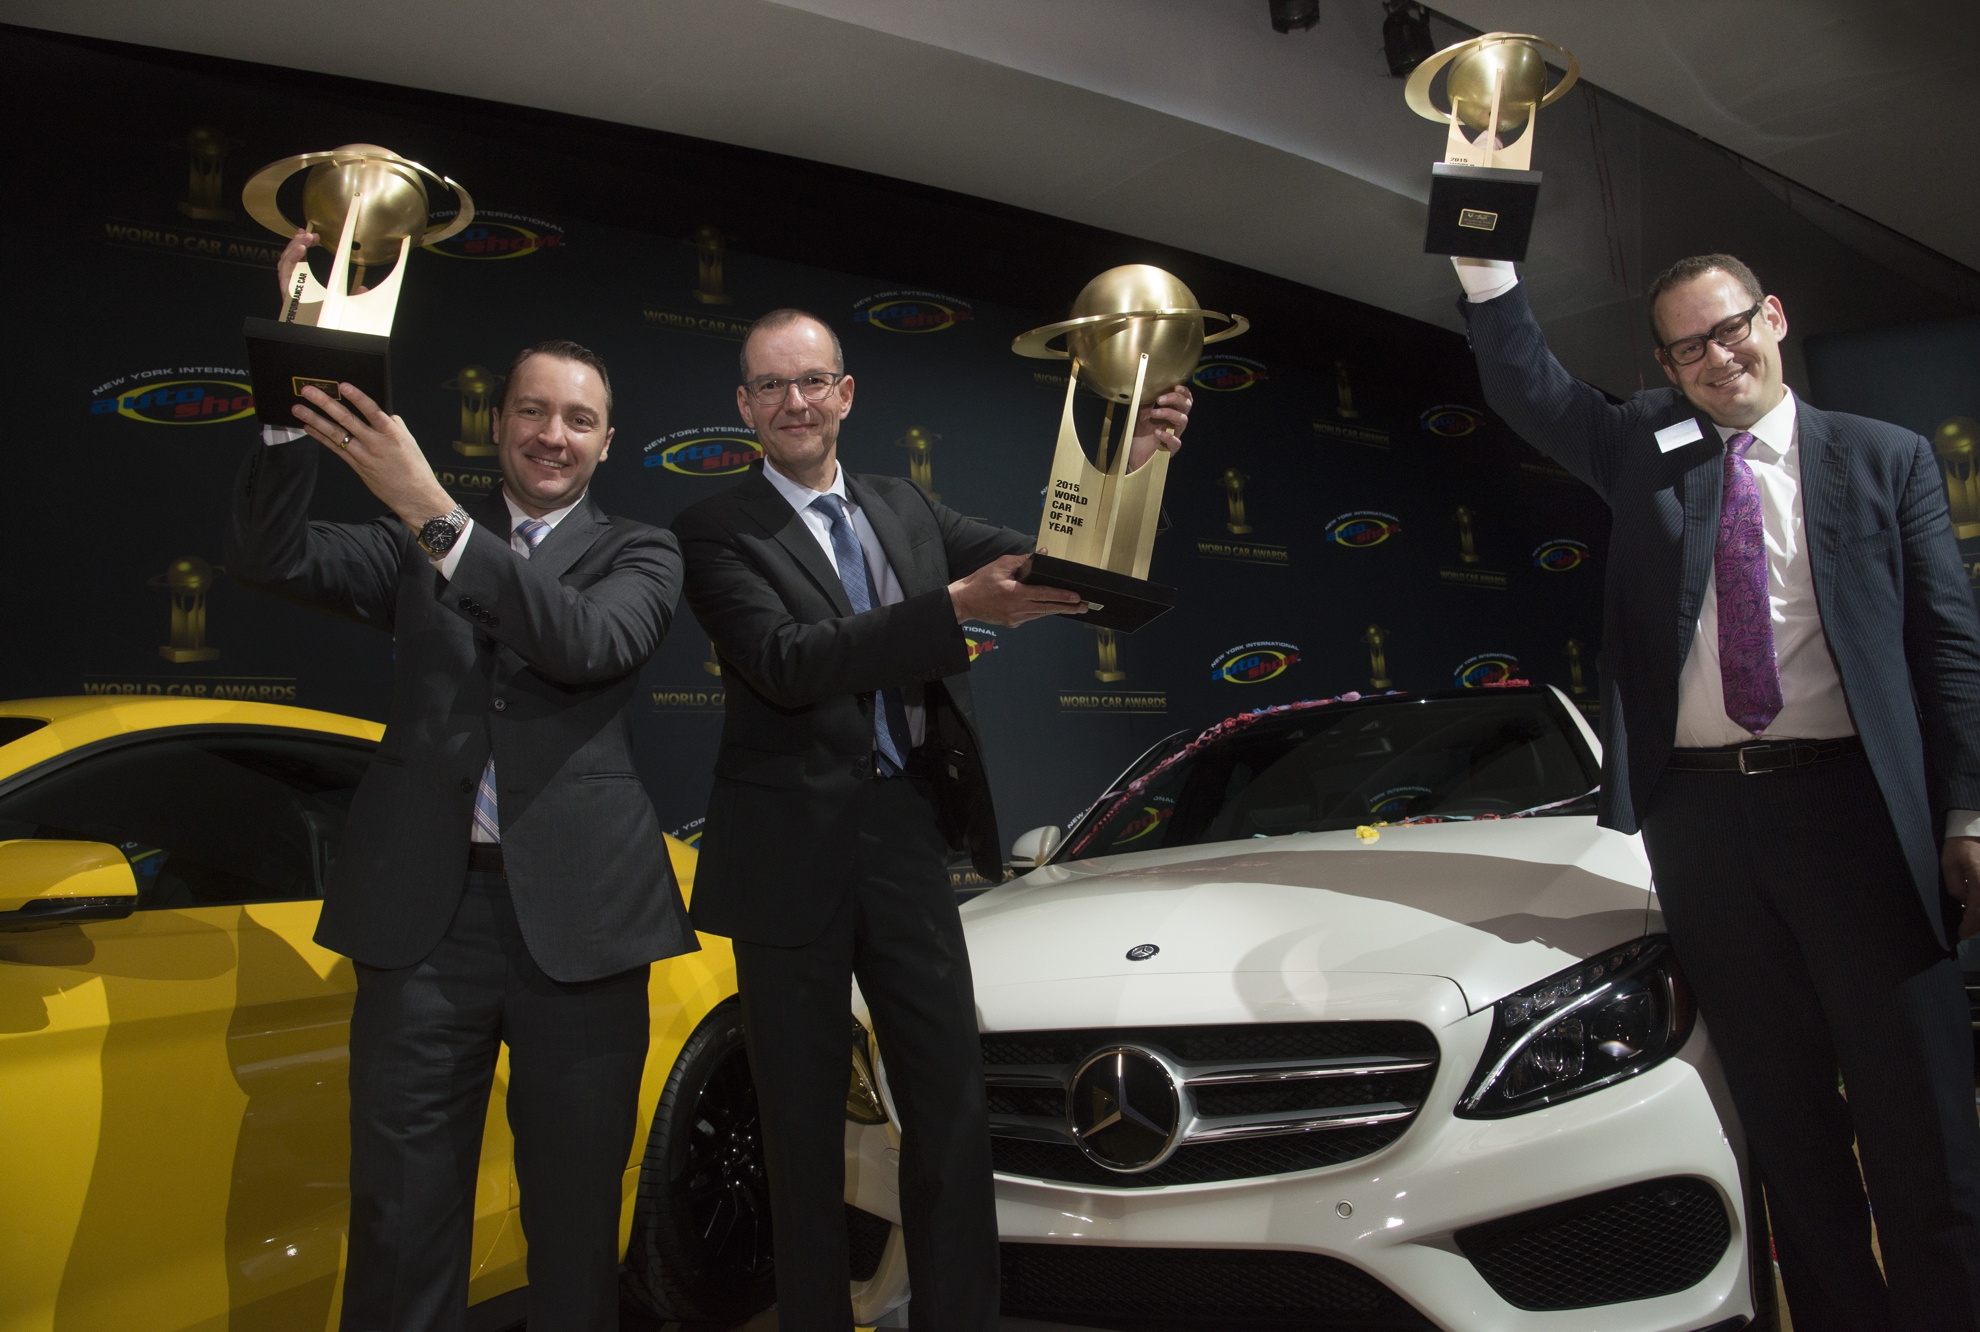 Mercedes-Benz C-Class is World Car of the Year